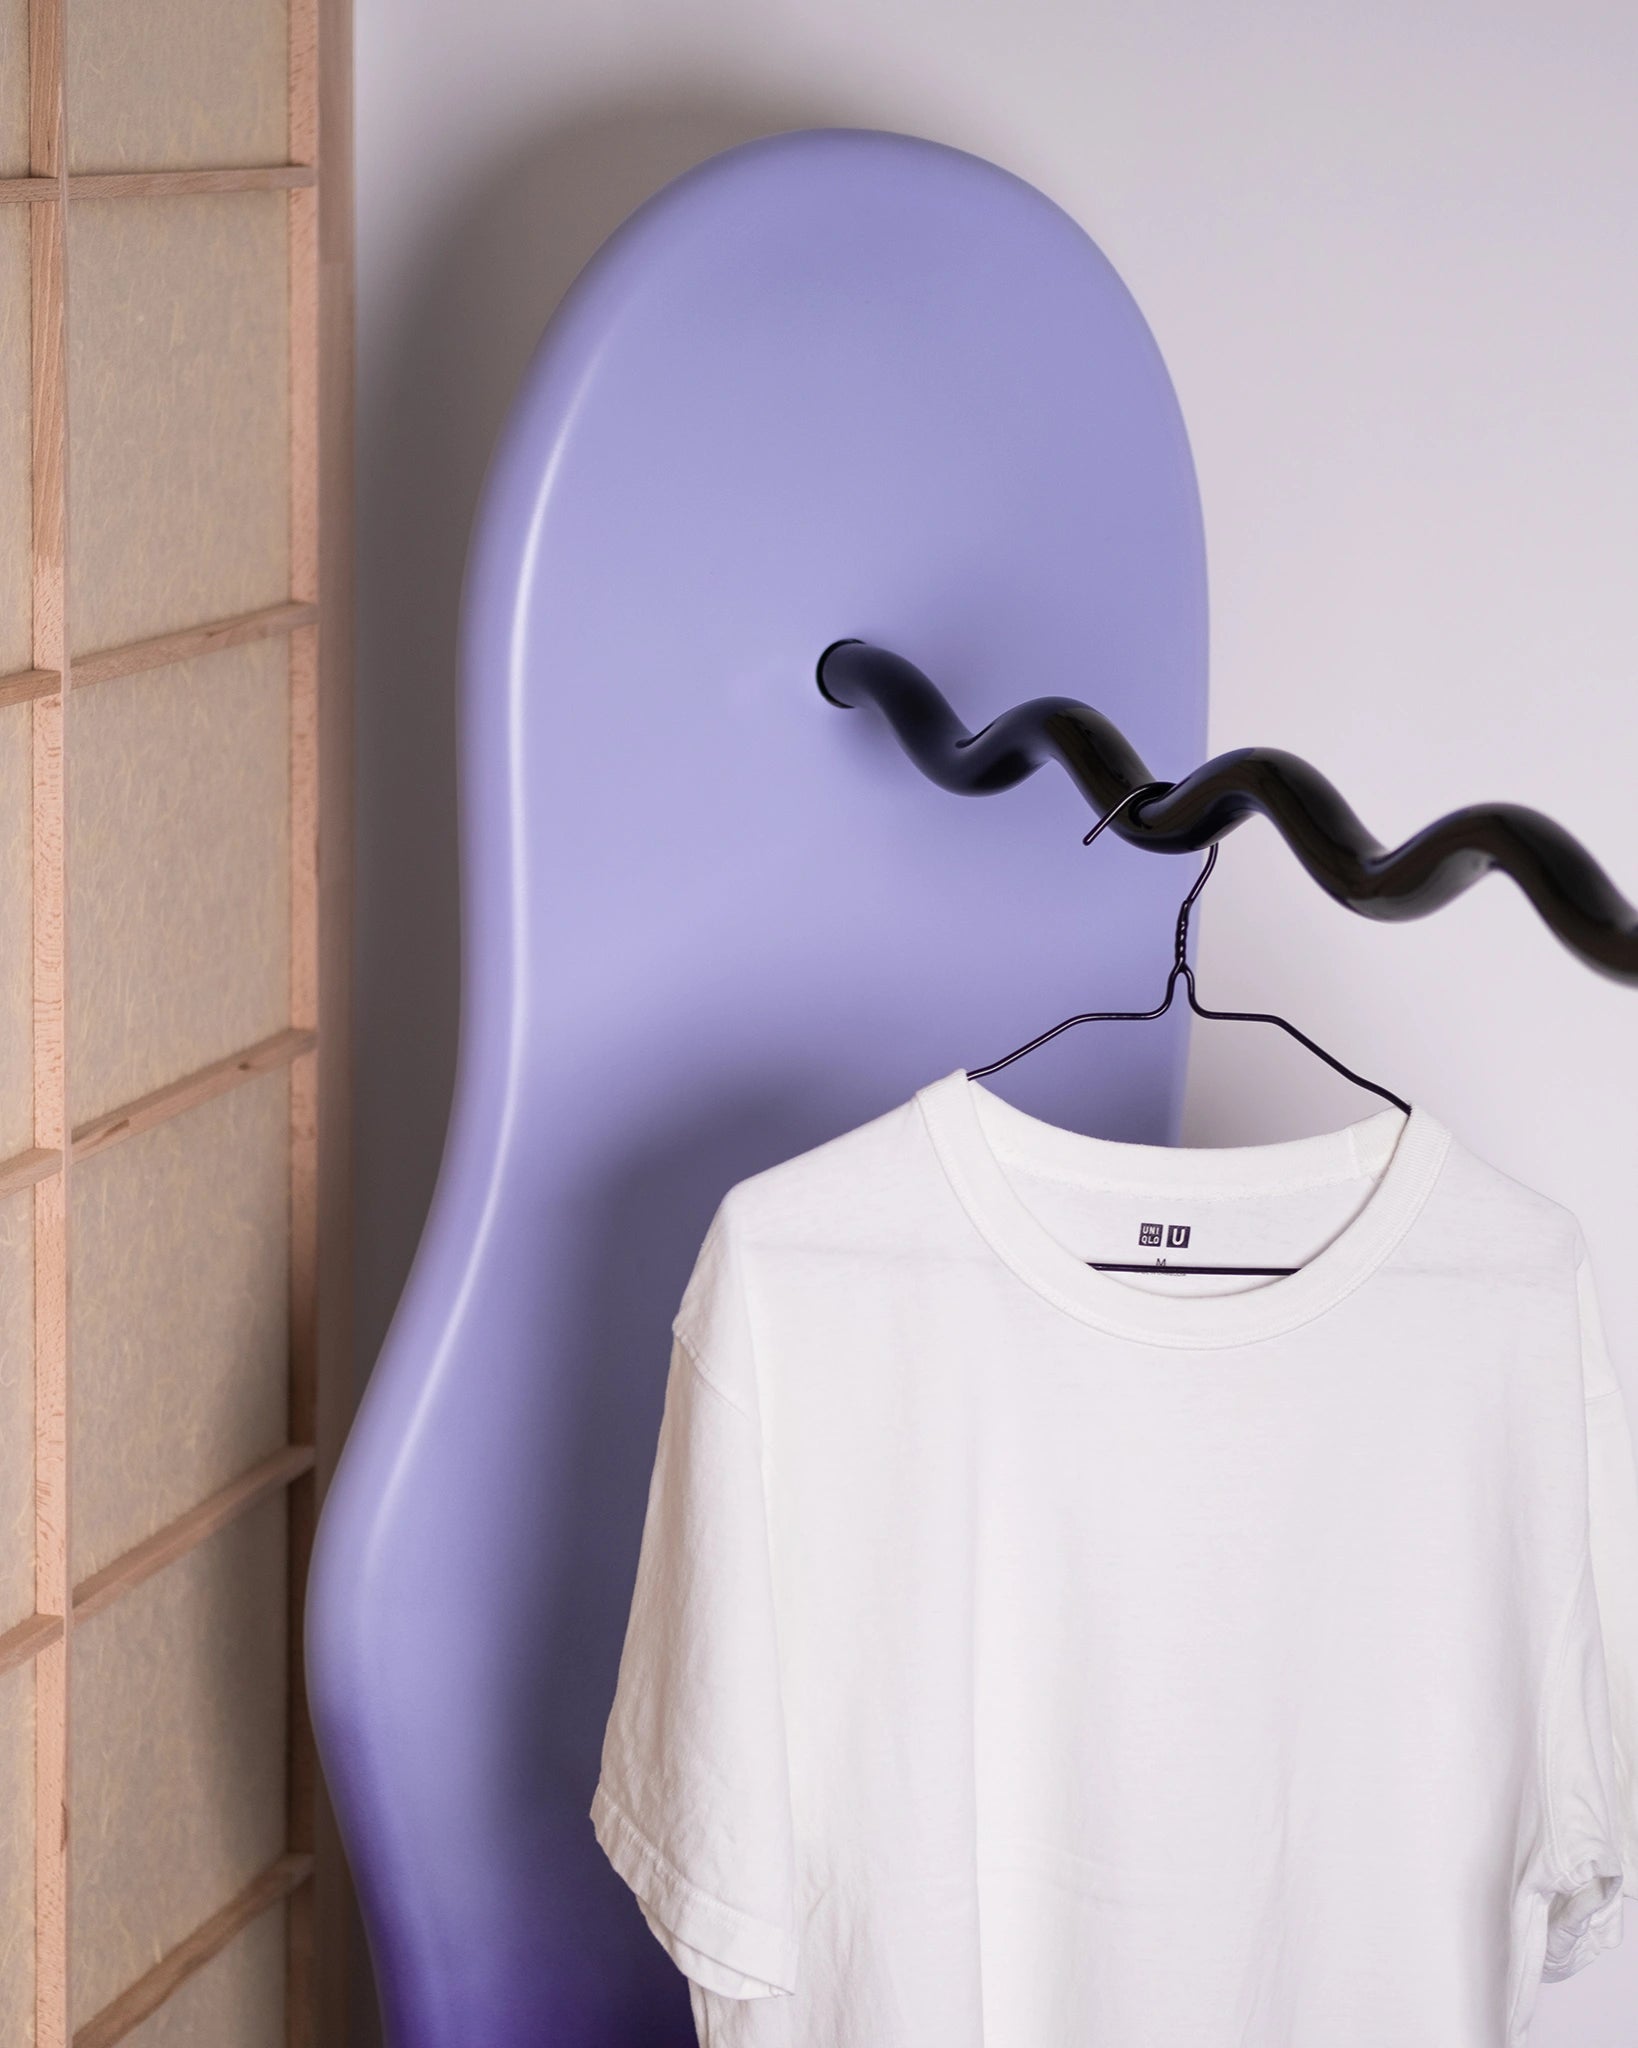 detail of a clothing rack in a home setting with soft shapes and a wavy metal hanging tube, purple gradient, t-shirt on it